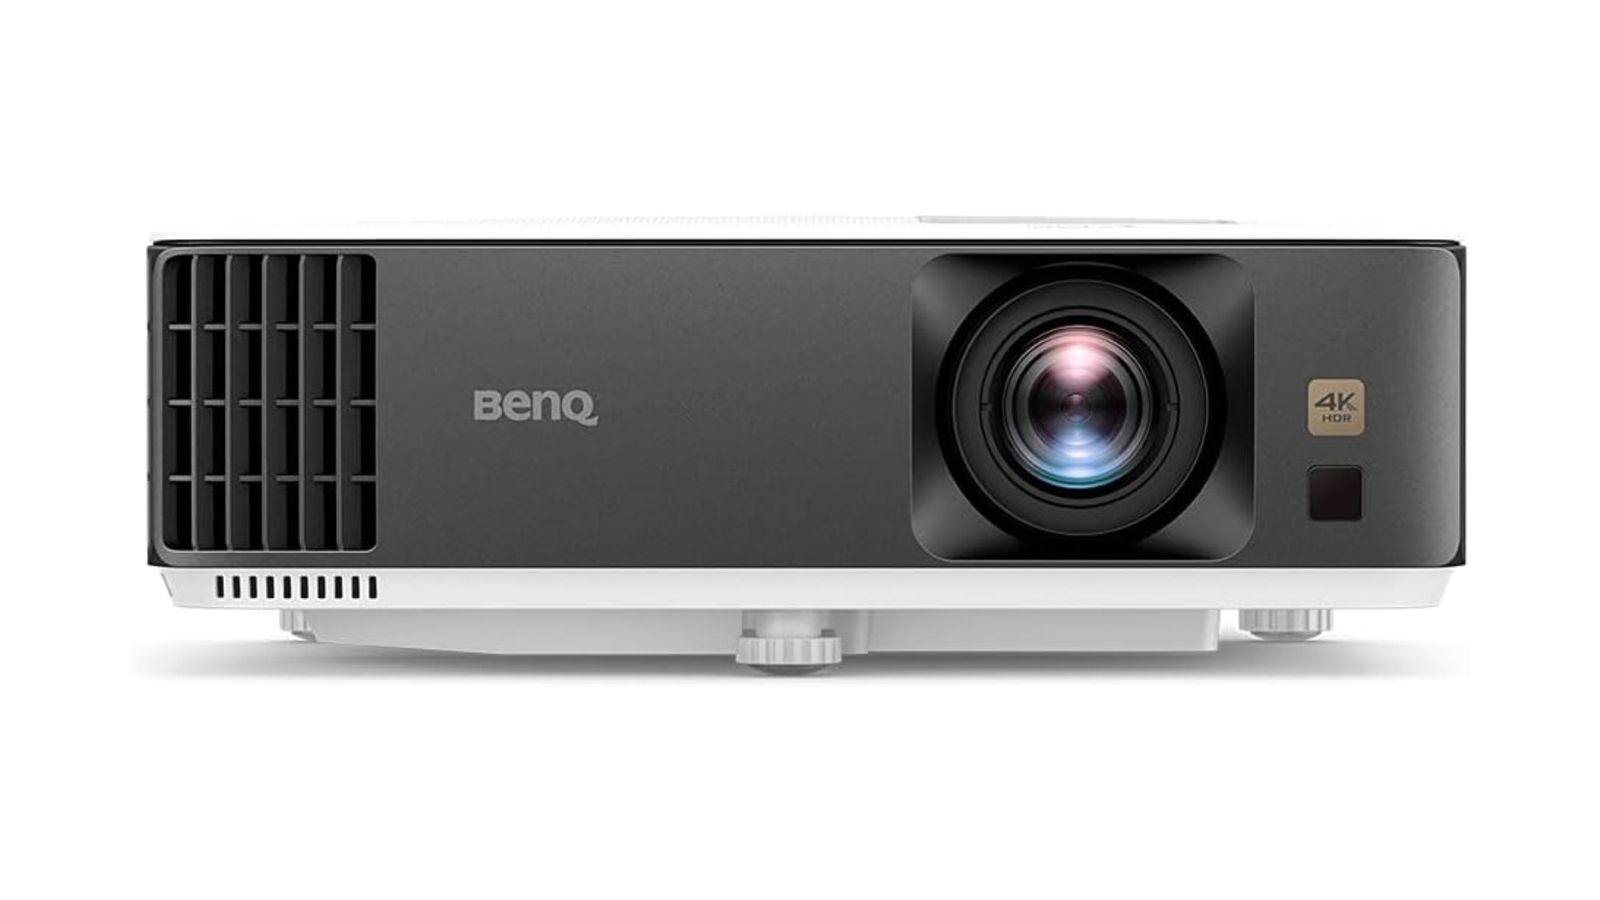 BenQ TK700 product image of a dark grey and white projector with the lens on the left side.